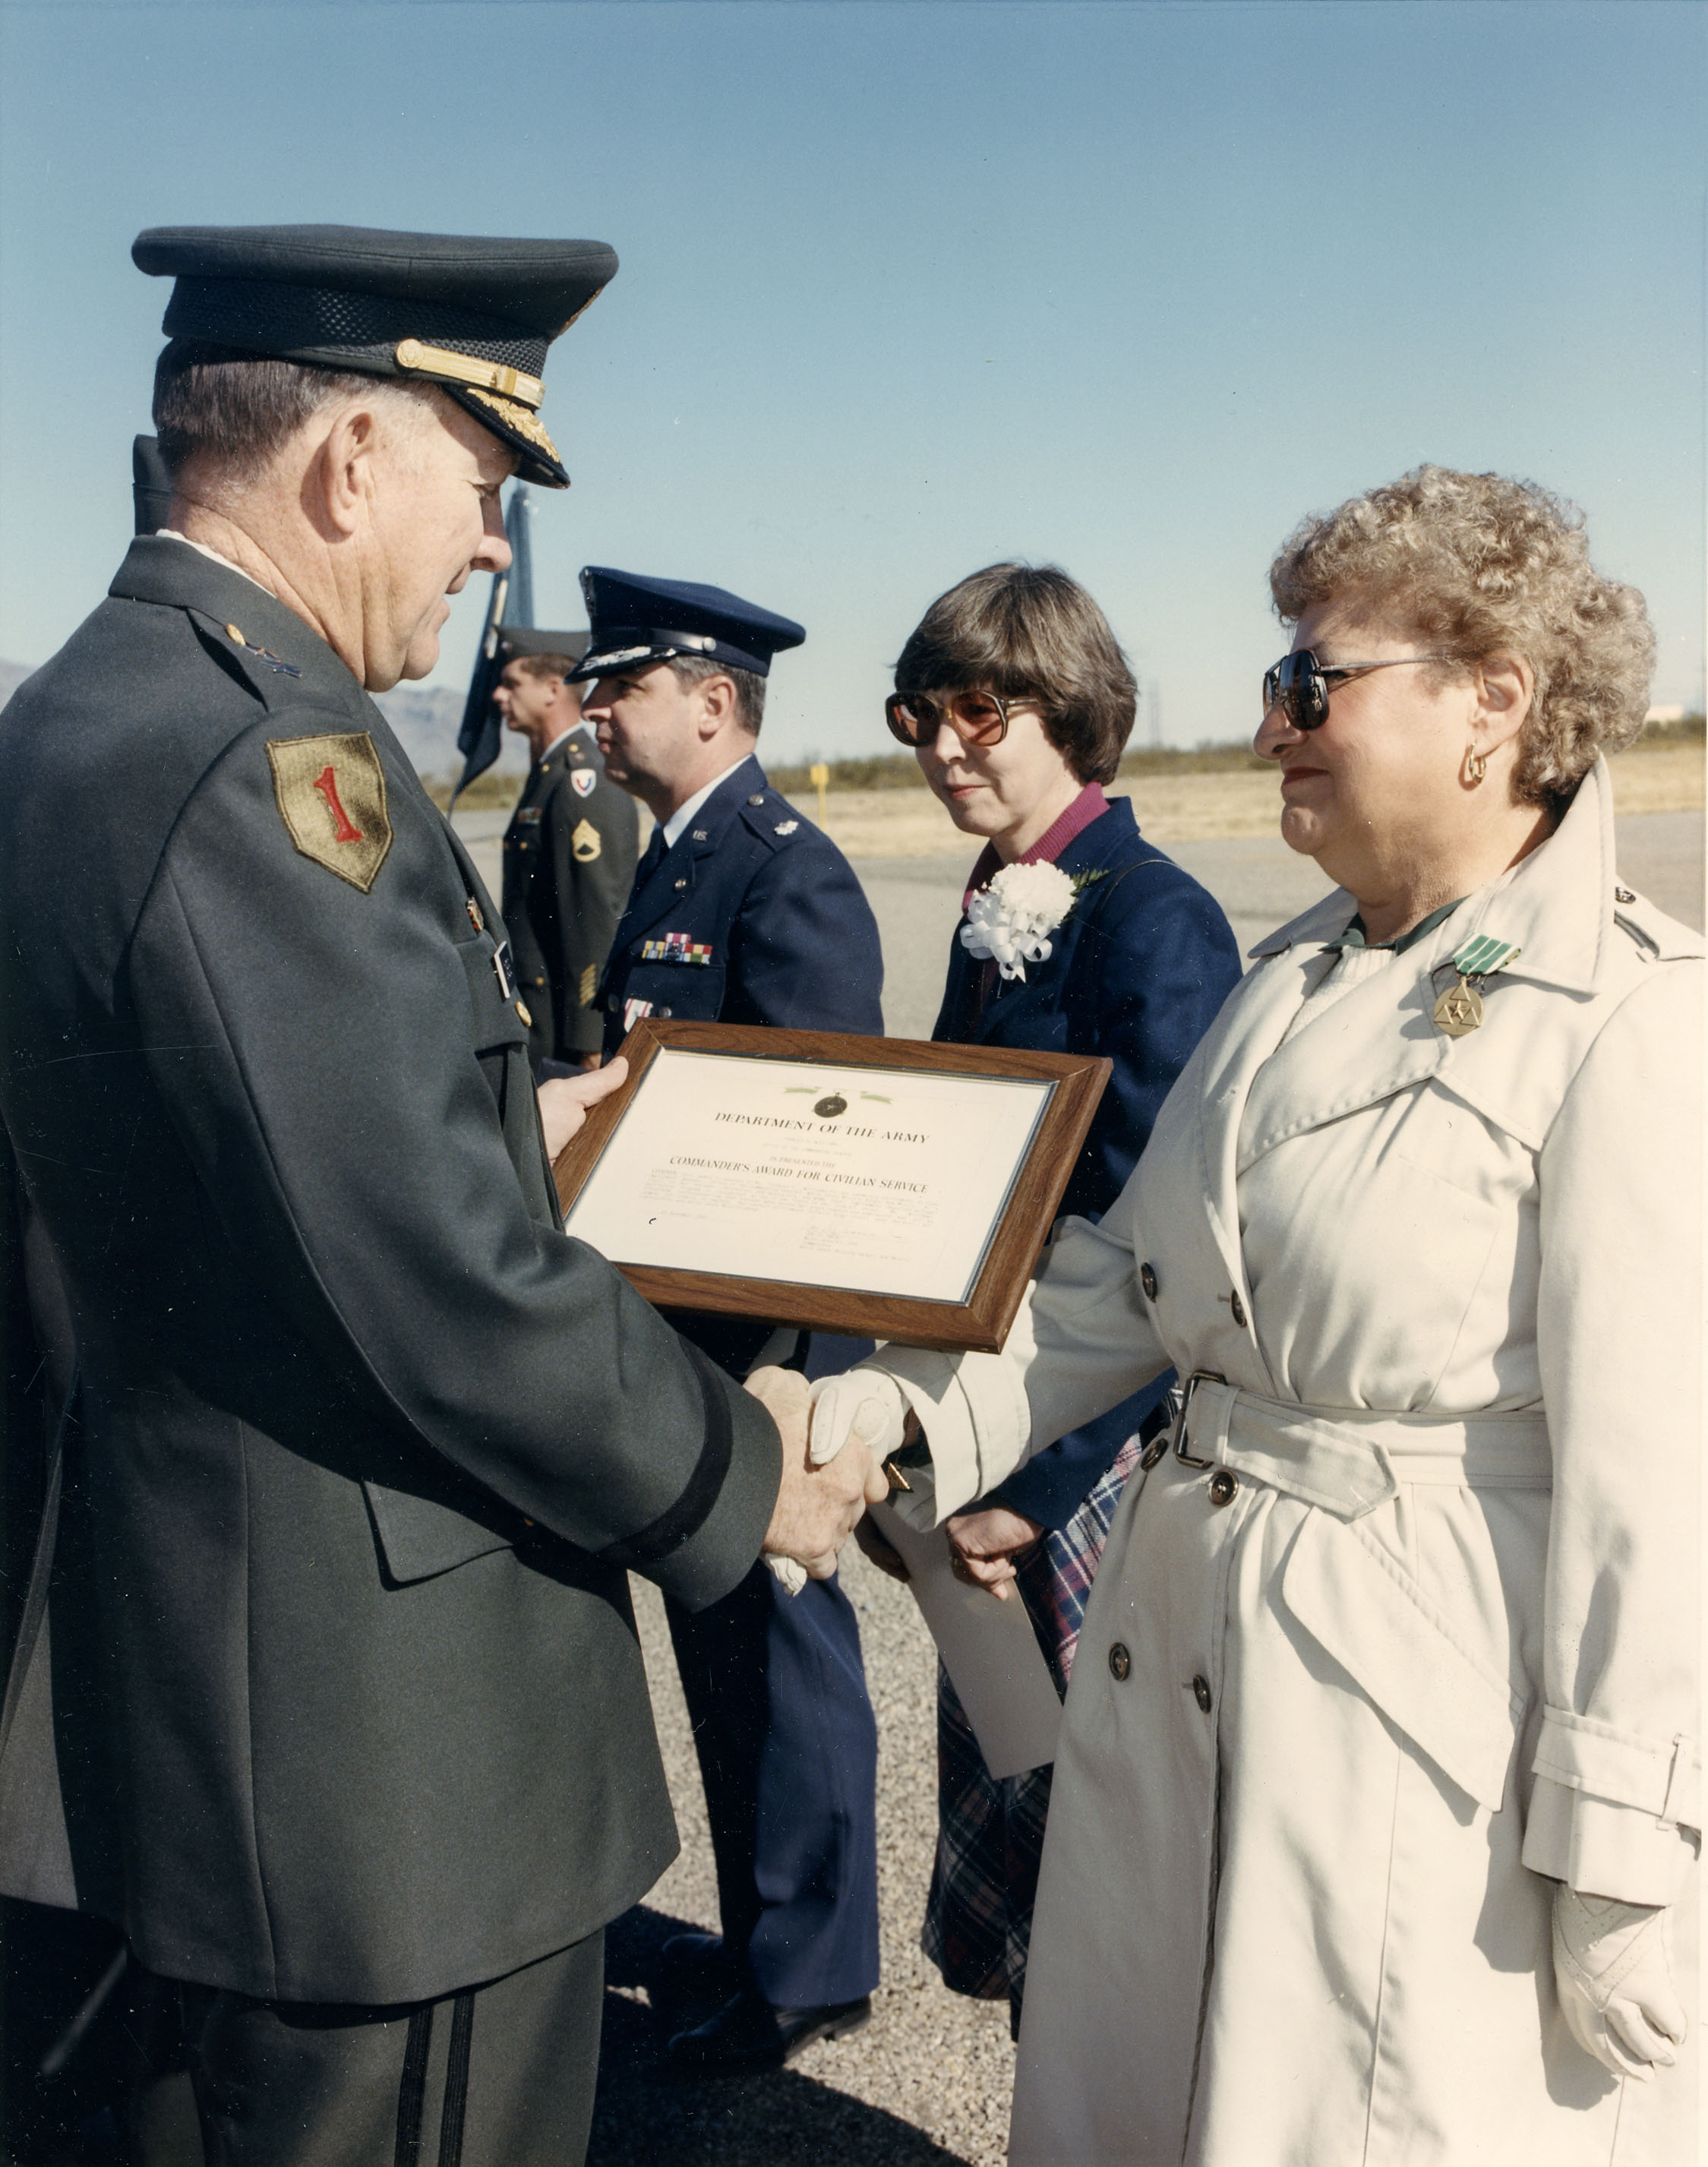 color photograph of five people; three men in military uniform and two women; Frances William received and award from the United States Army